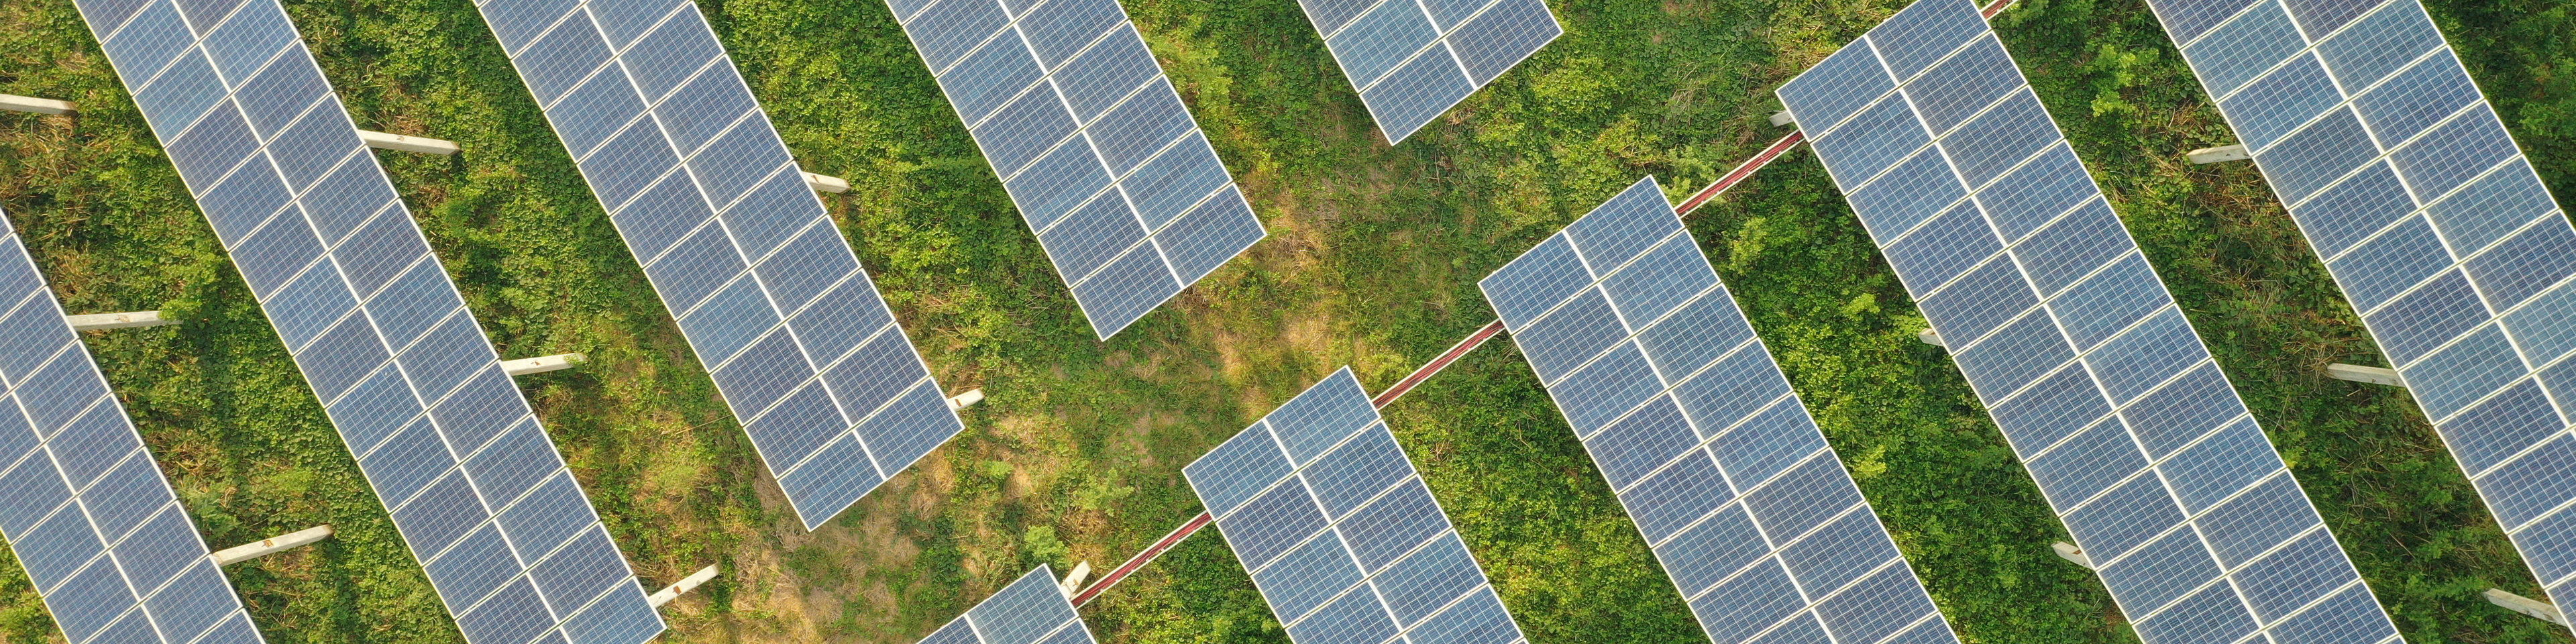 Solar panels stationary rows, solar power stations in high angle view isolated over green grass fields background